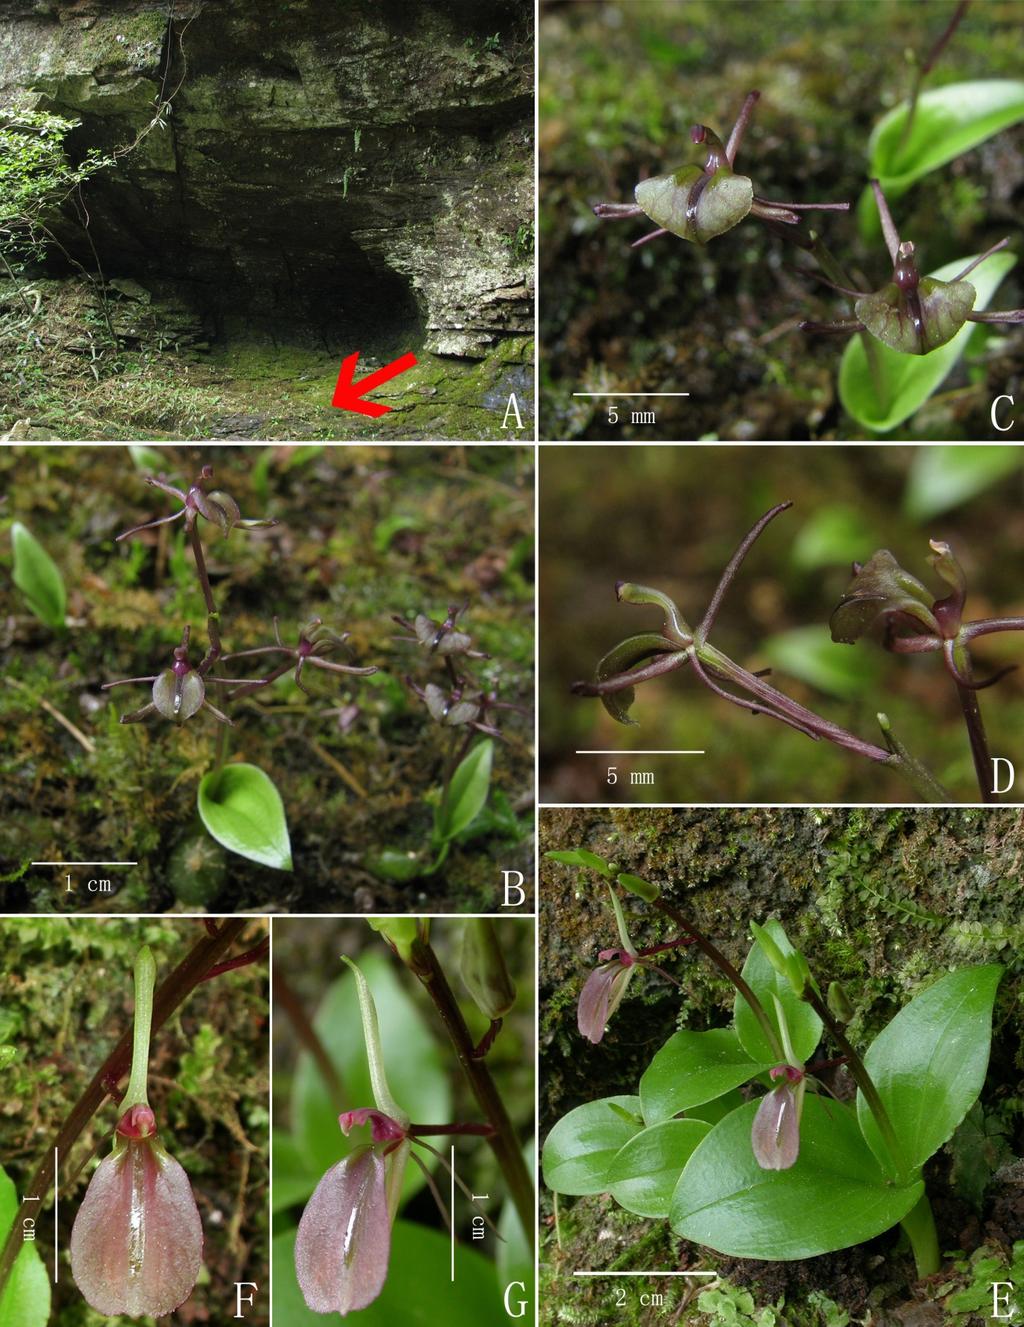 Taiwania Vol. 57, No. 1 Fig. 2. A-D: Liparis damingshanensis (Photographed by Lei Wu). A: Habitat (the red arrow shows the place where the new species grows).